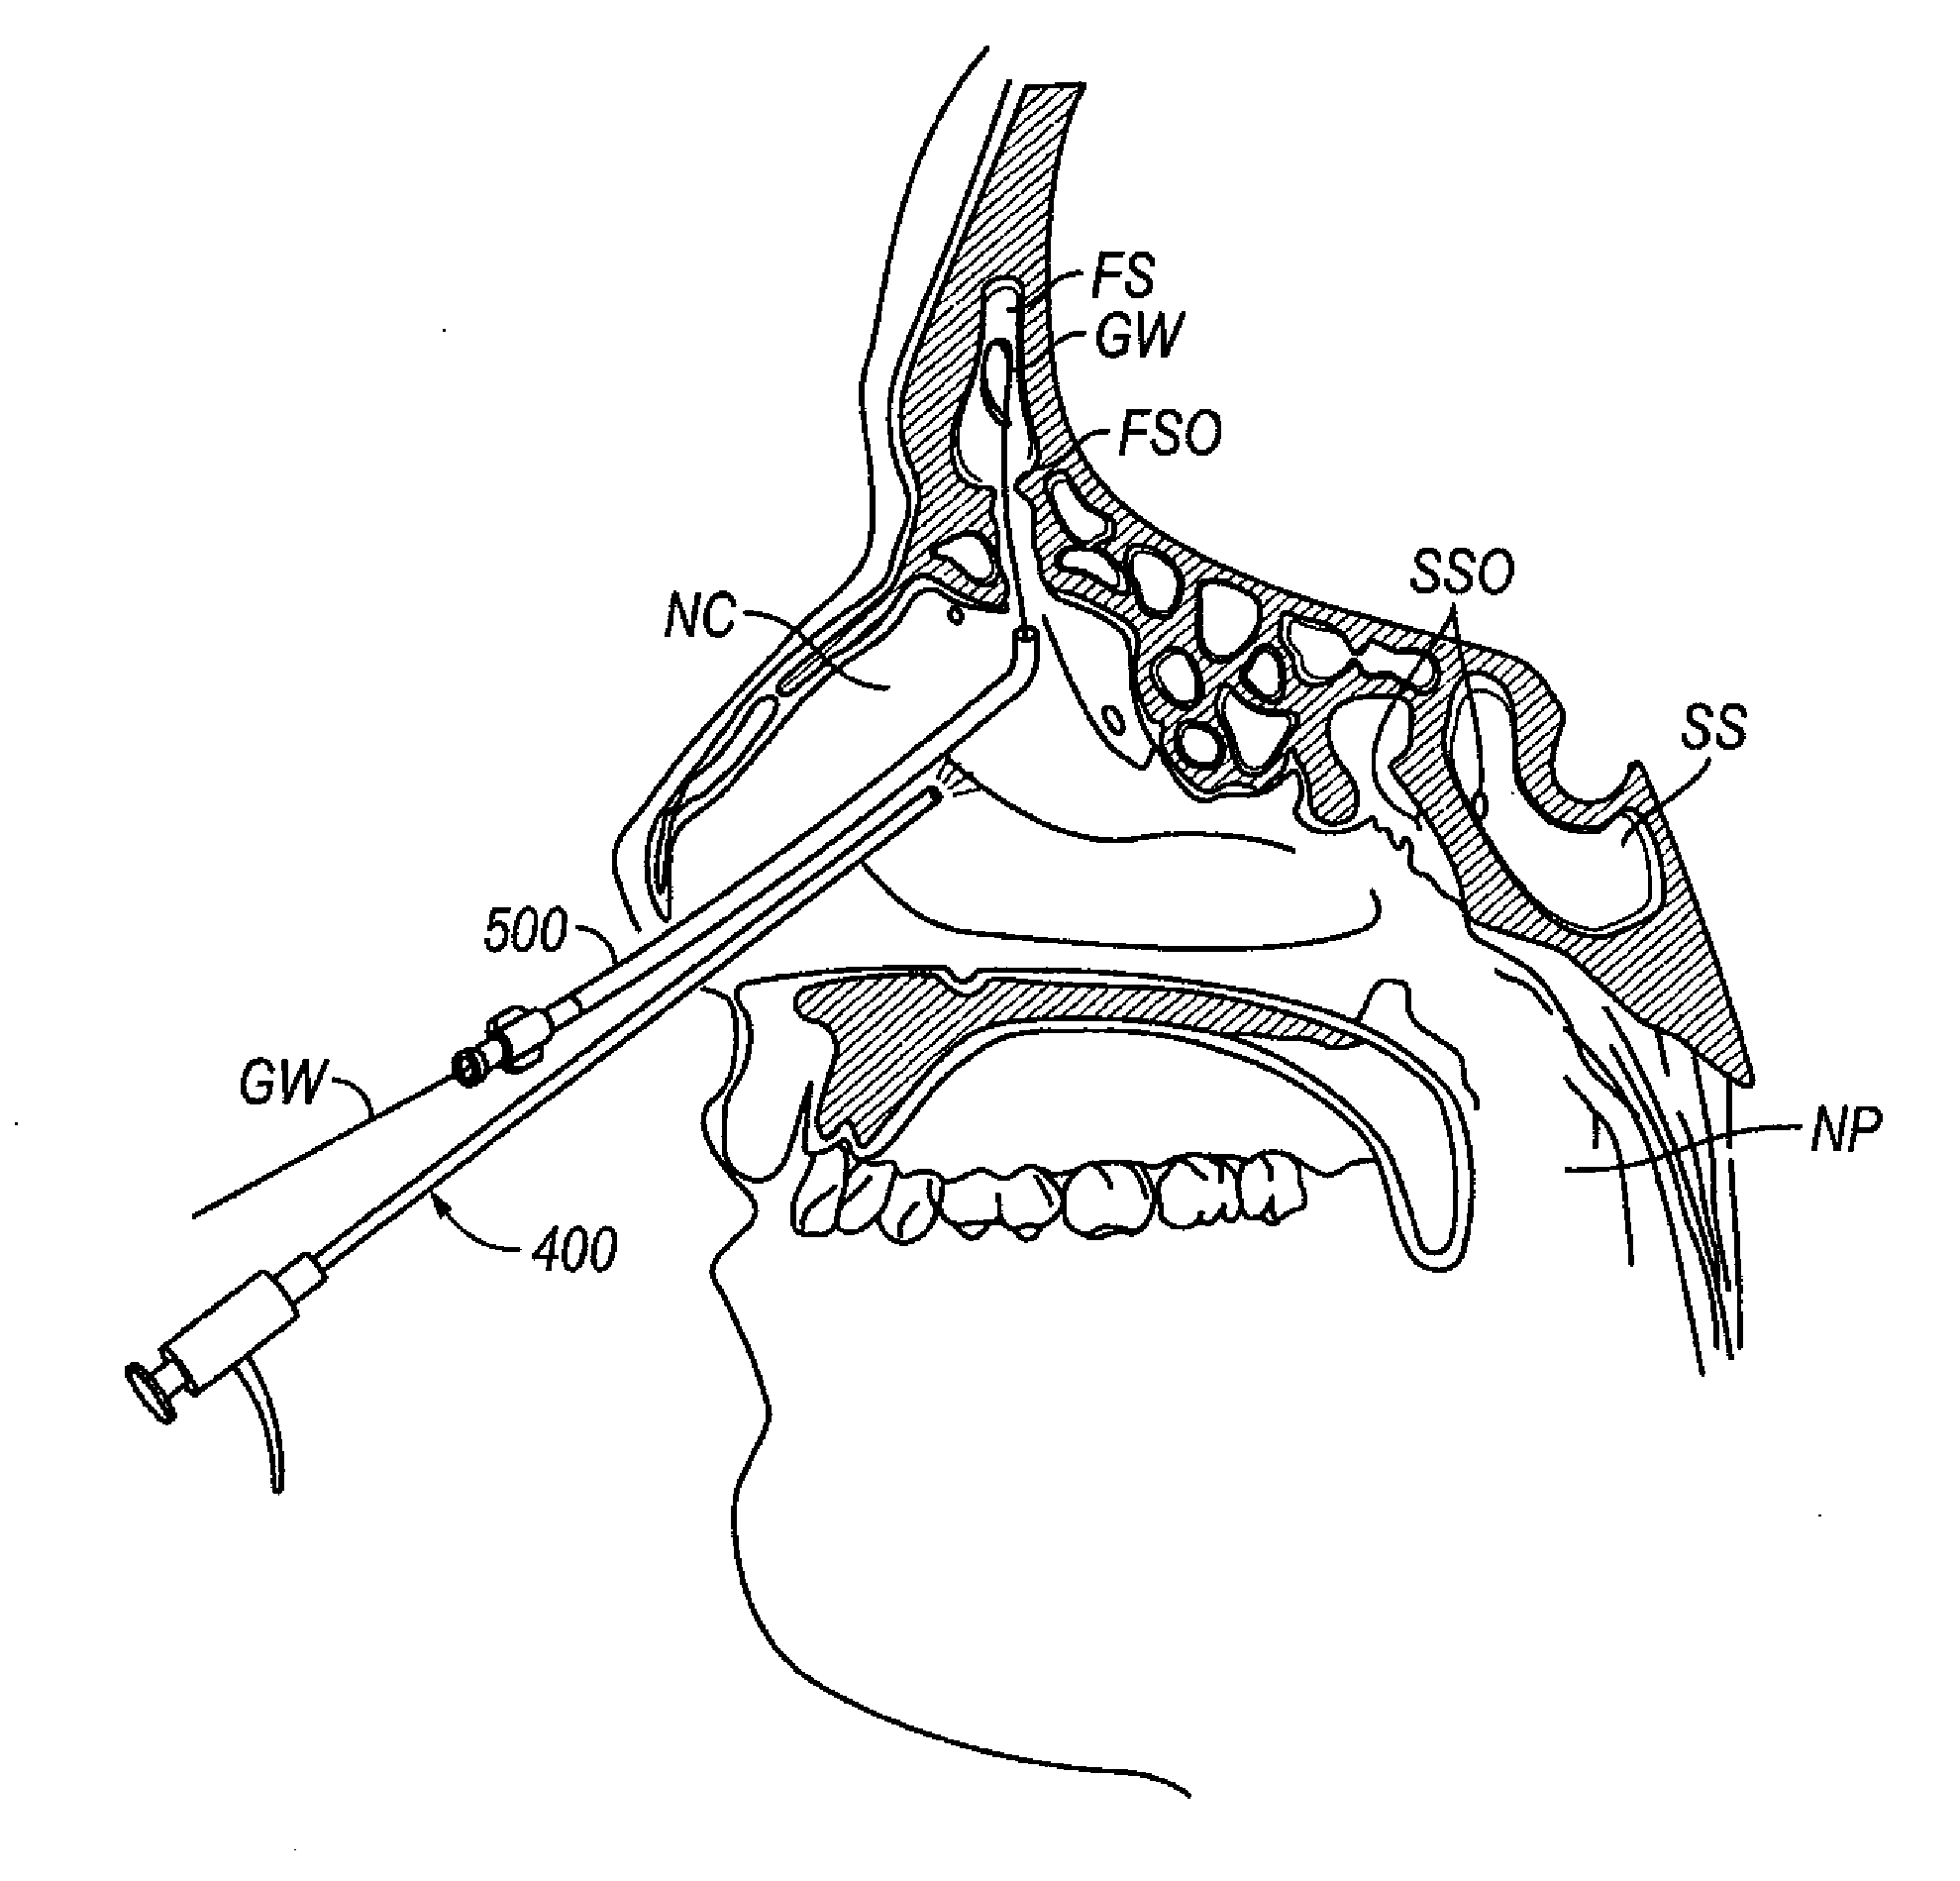 Ethmoidotomy System and Implantable Spacer Devices Having Therapeutic Substance Delivery Capability for Treatment of Paranasal Sinusitis